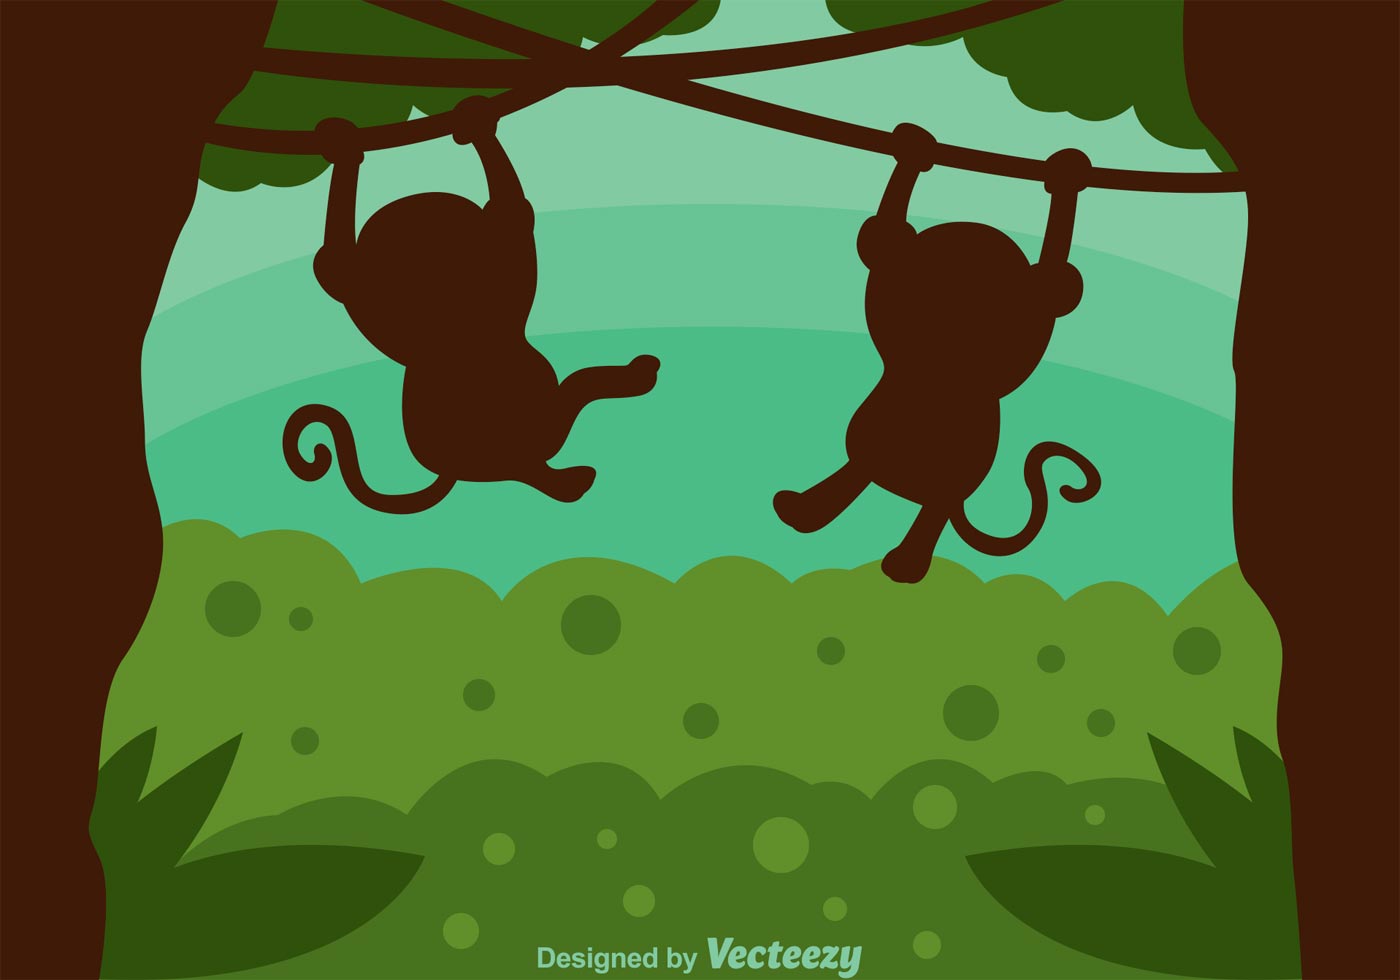 Monkey Silhouette In Jungle - Download Free Vectors ...